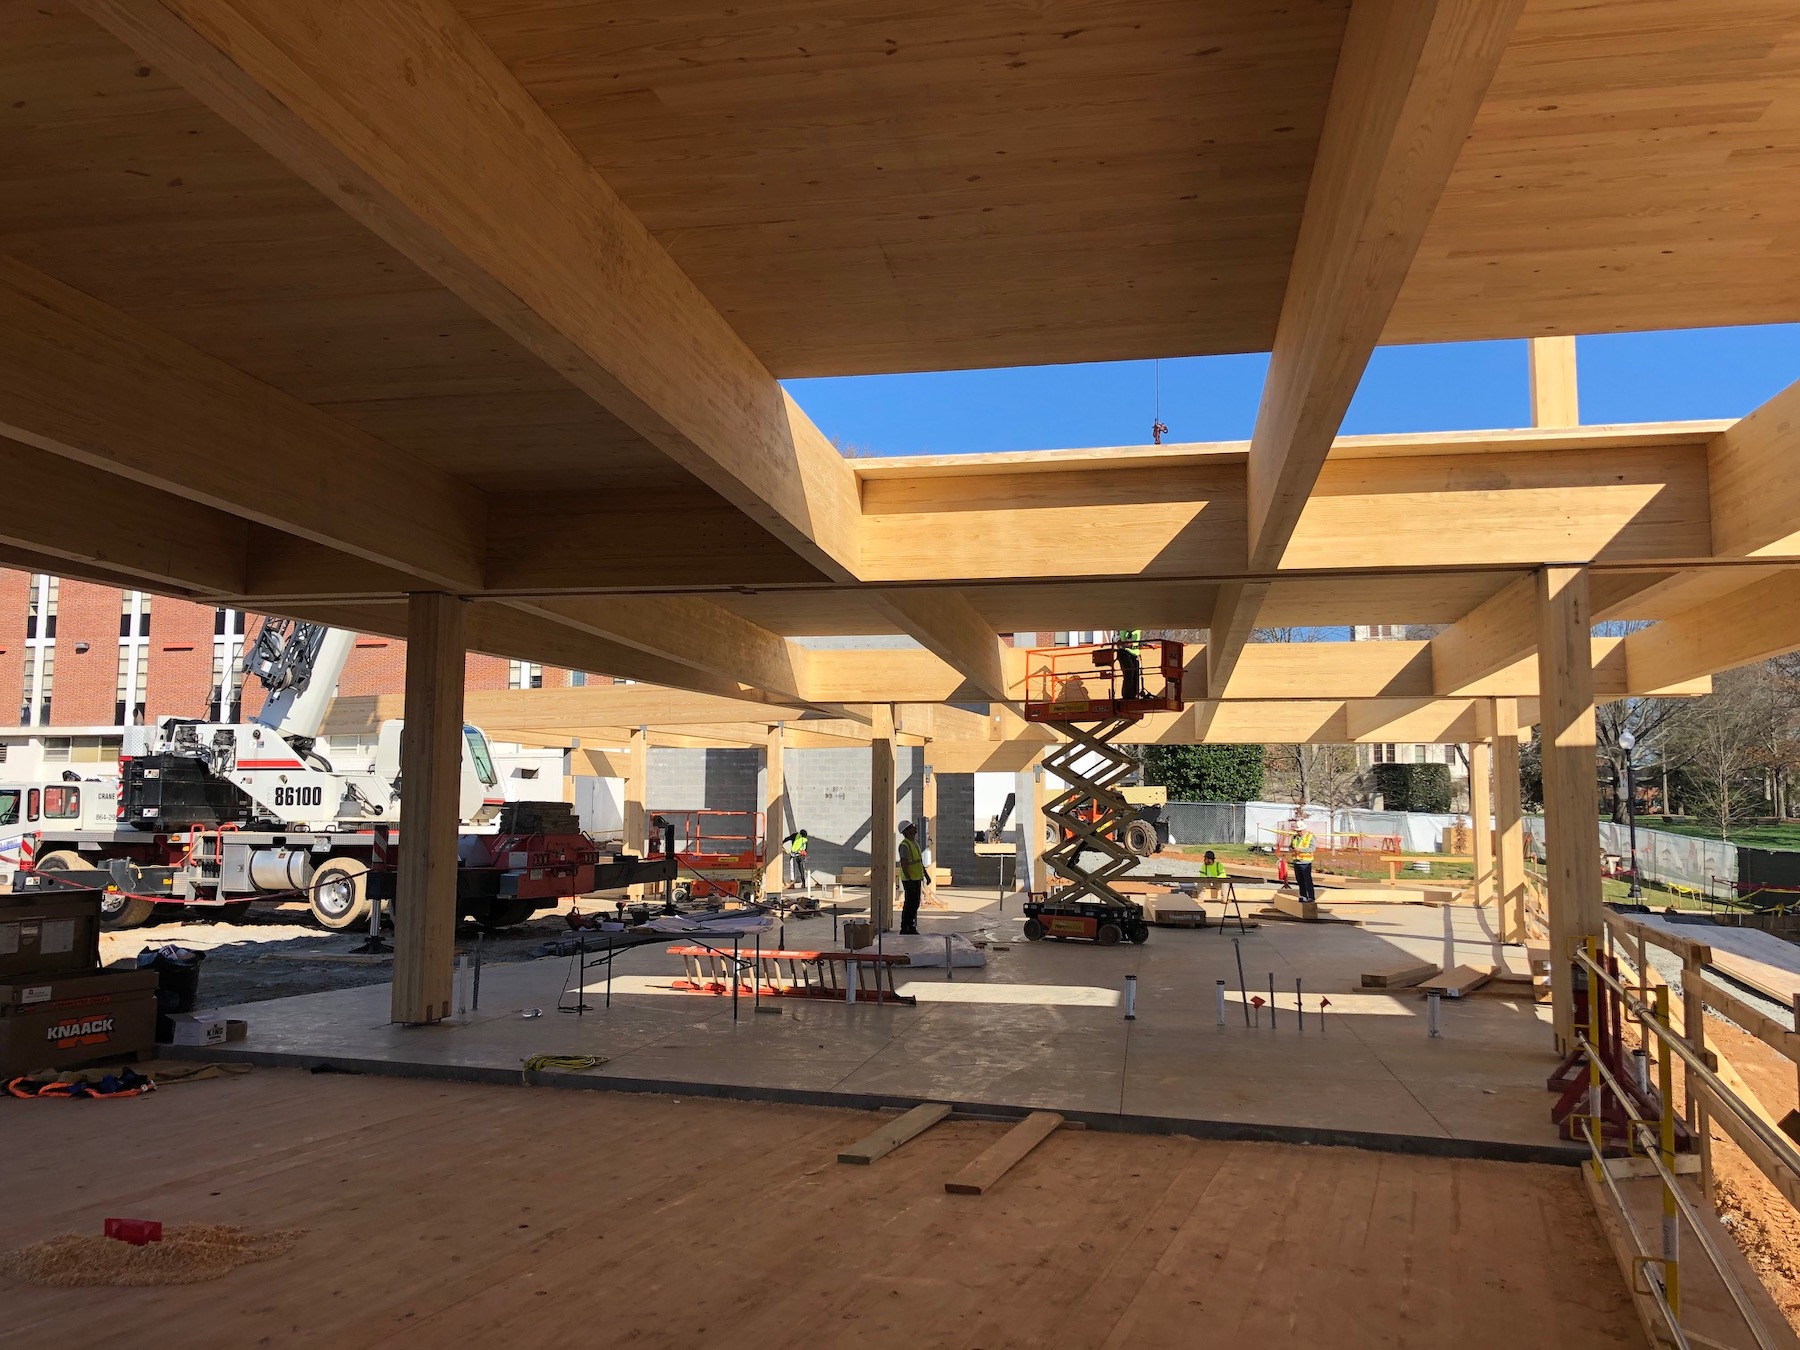 The use of mass timber construction time by 25 percent.